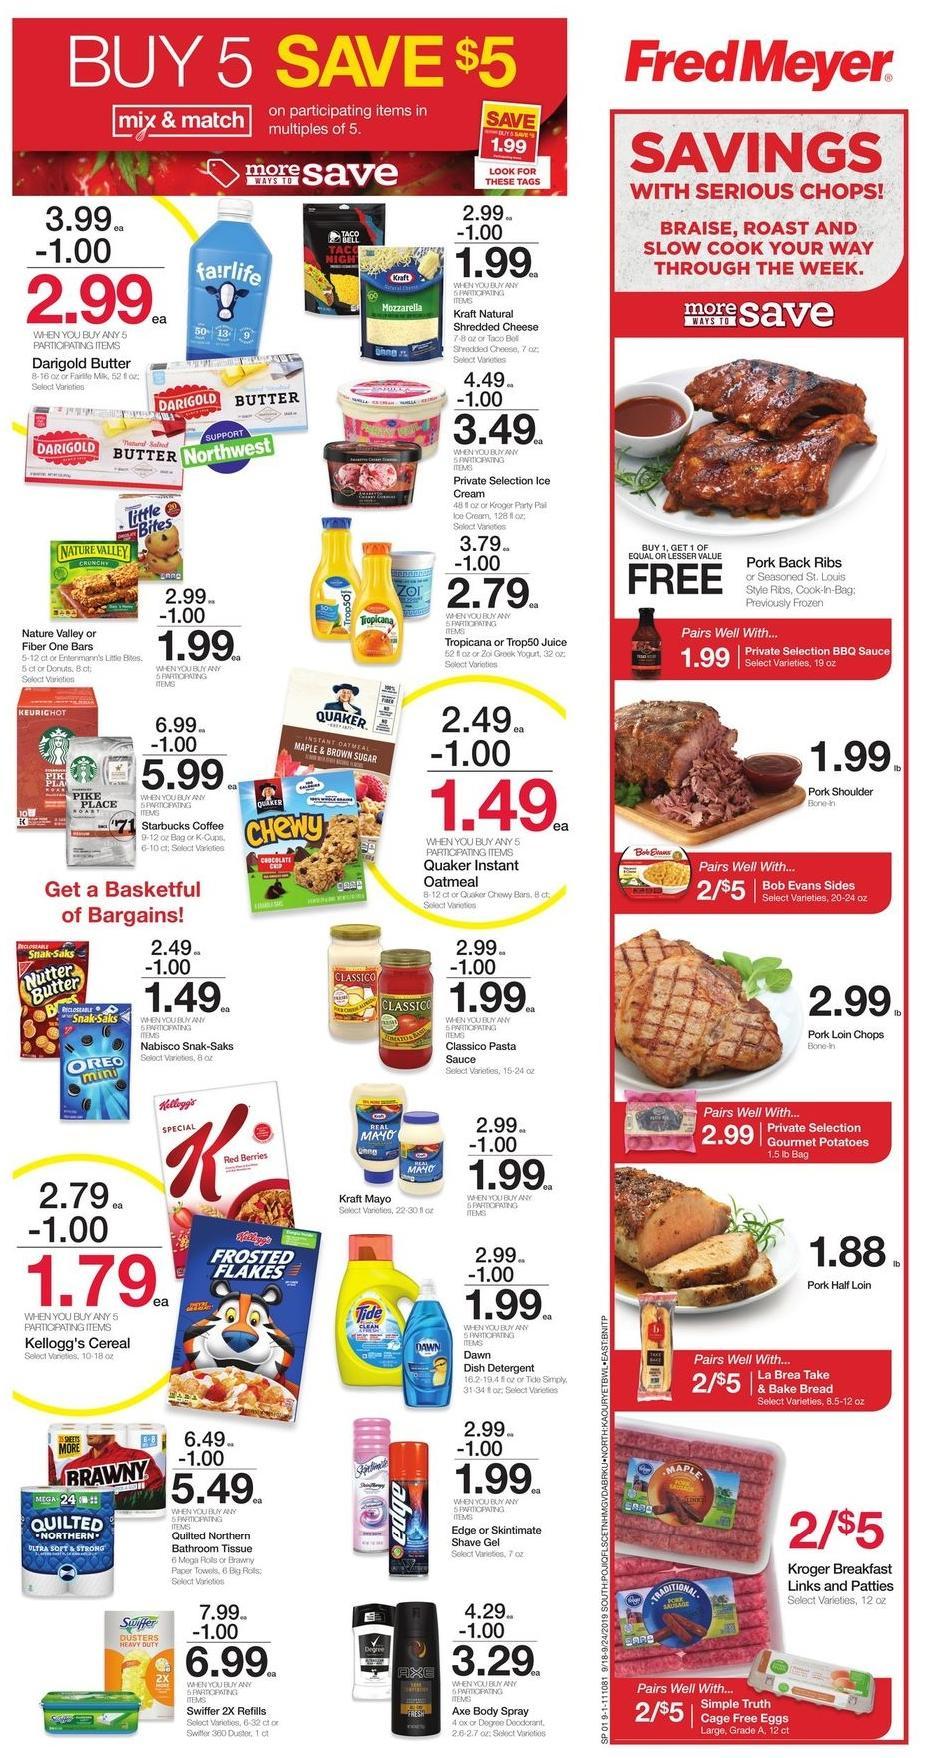 Fred Meyer Weekly Ad & Specials from September 18 Page 2